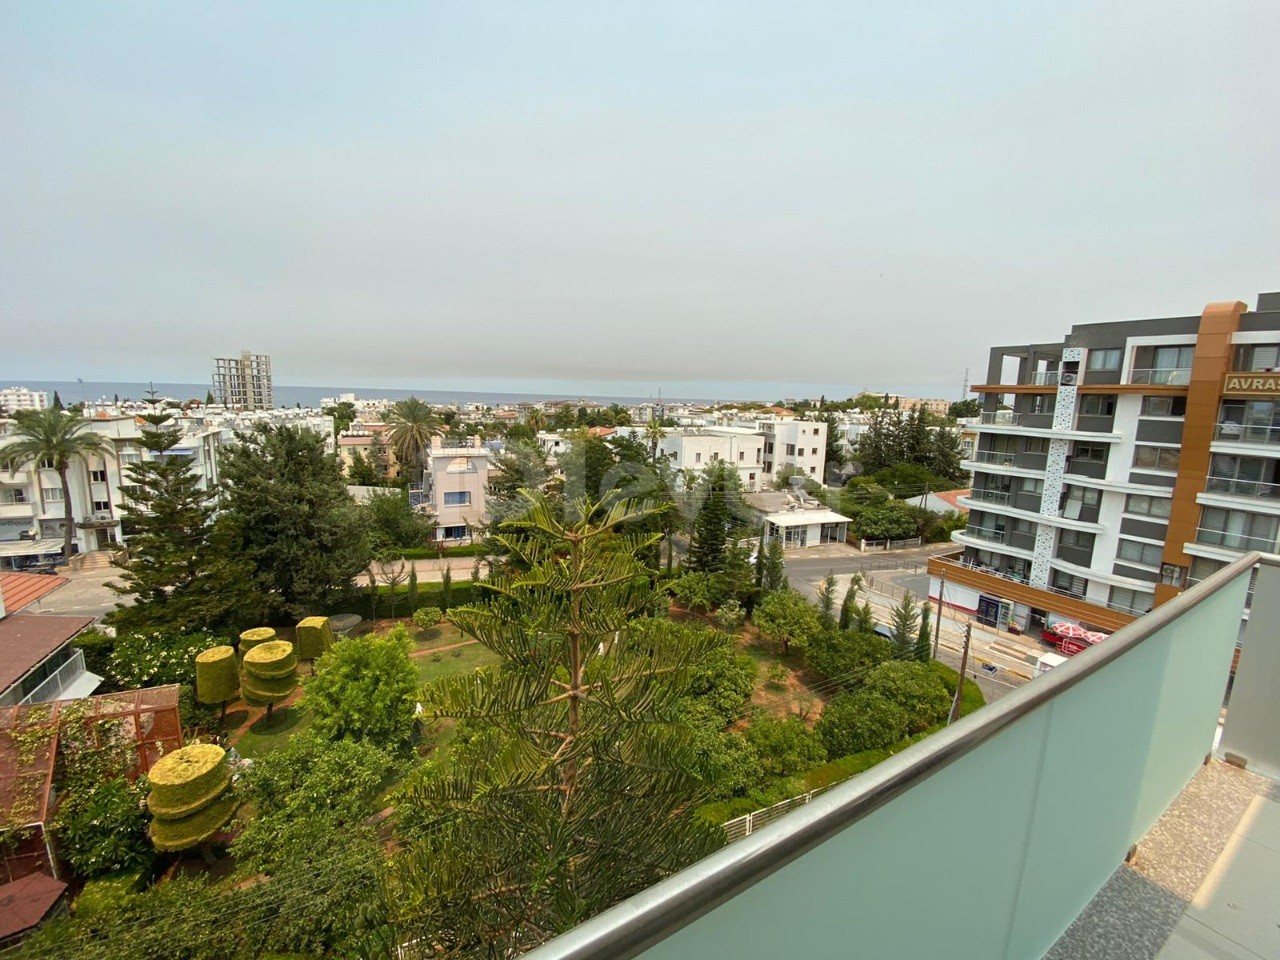 PANORAMİC VİEW OF KYRENİA , OUR WONDERFUL PETHOUSE APARTMENT İS NOW ON SALE.